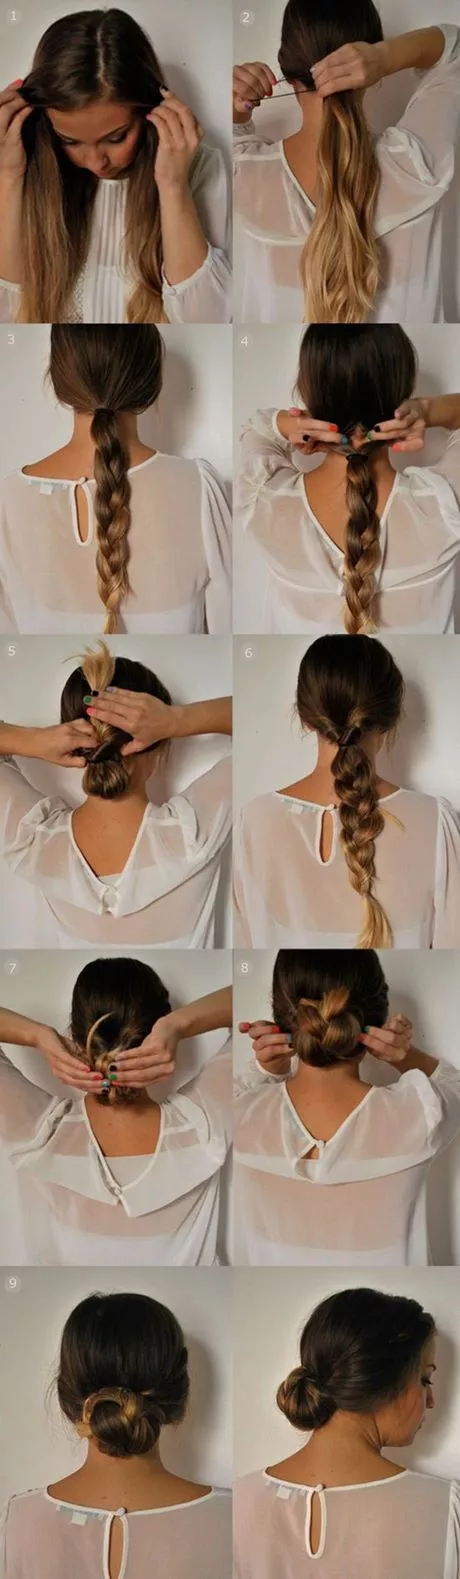 Easy do it yourself hairstyles easy-do-it-yourself-hairstyles-94_15-8-8